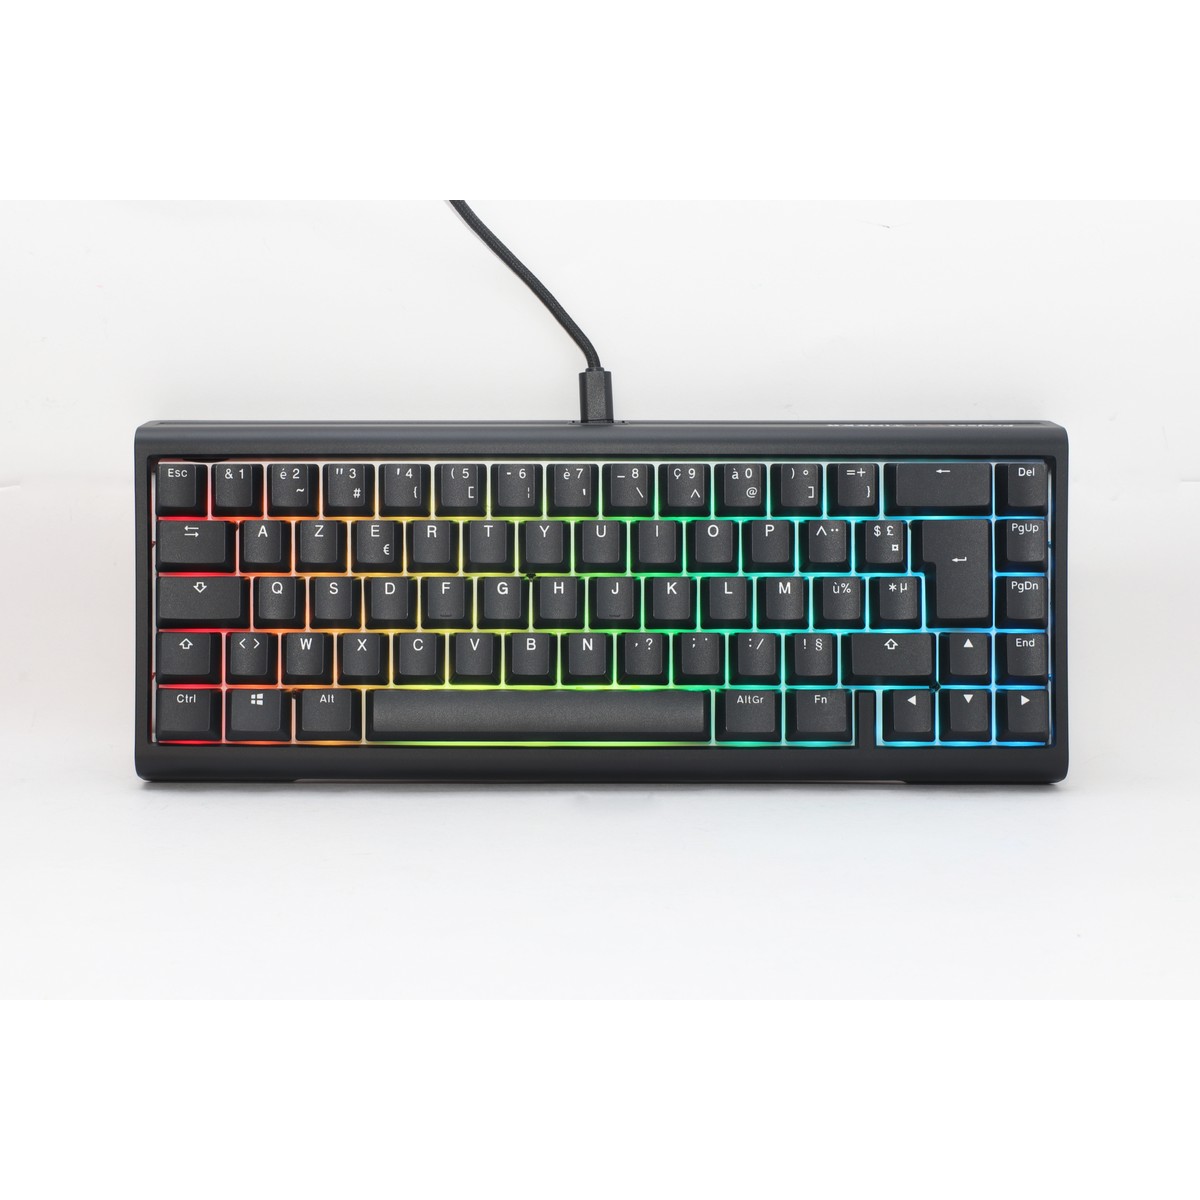 Ducky - Ducky ProjectD Tinker 65 Mechanical Gaming Customisable Keyboard Cherry MX Blue - Black